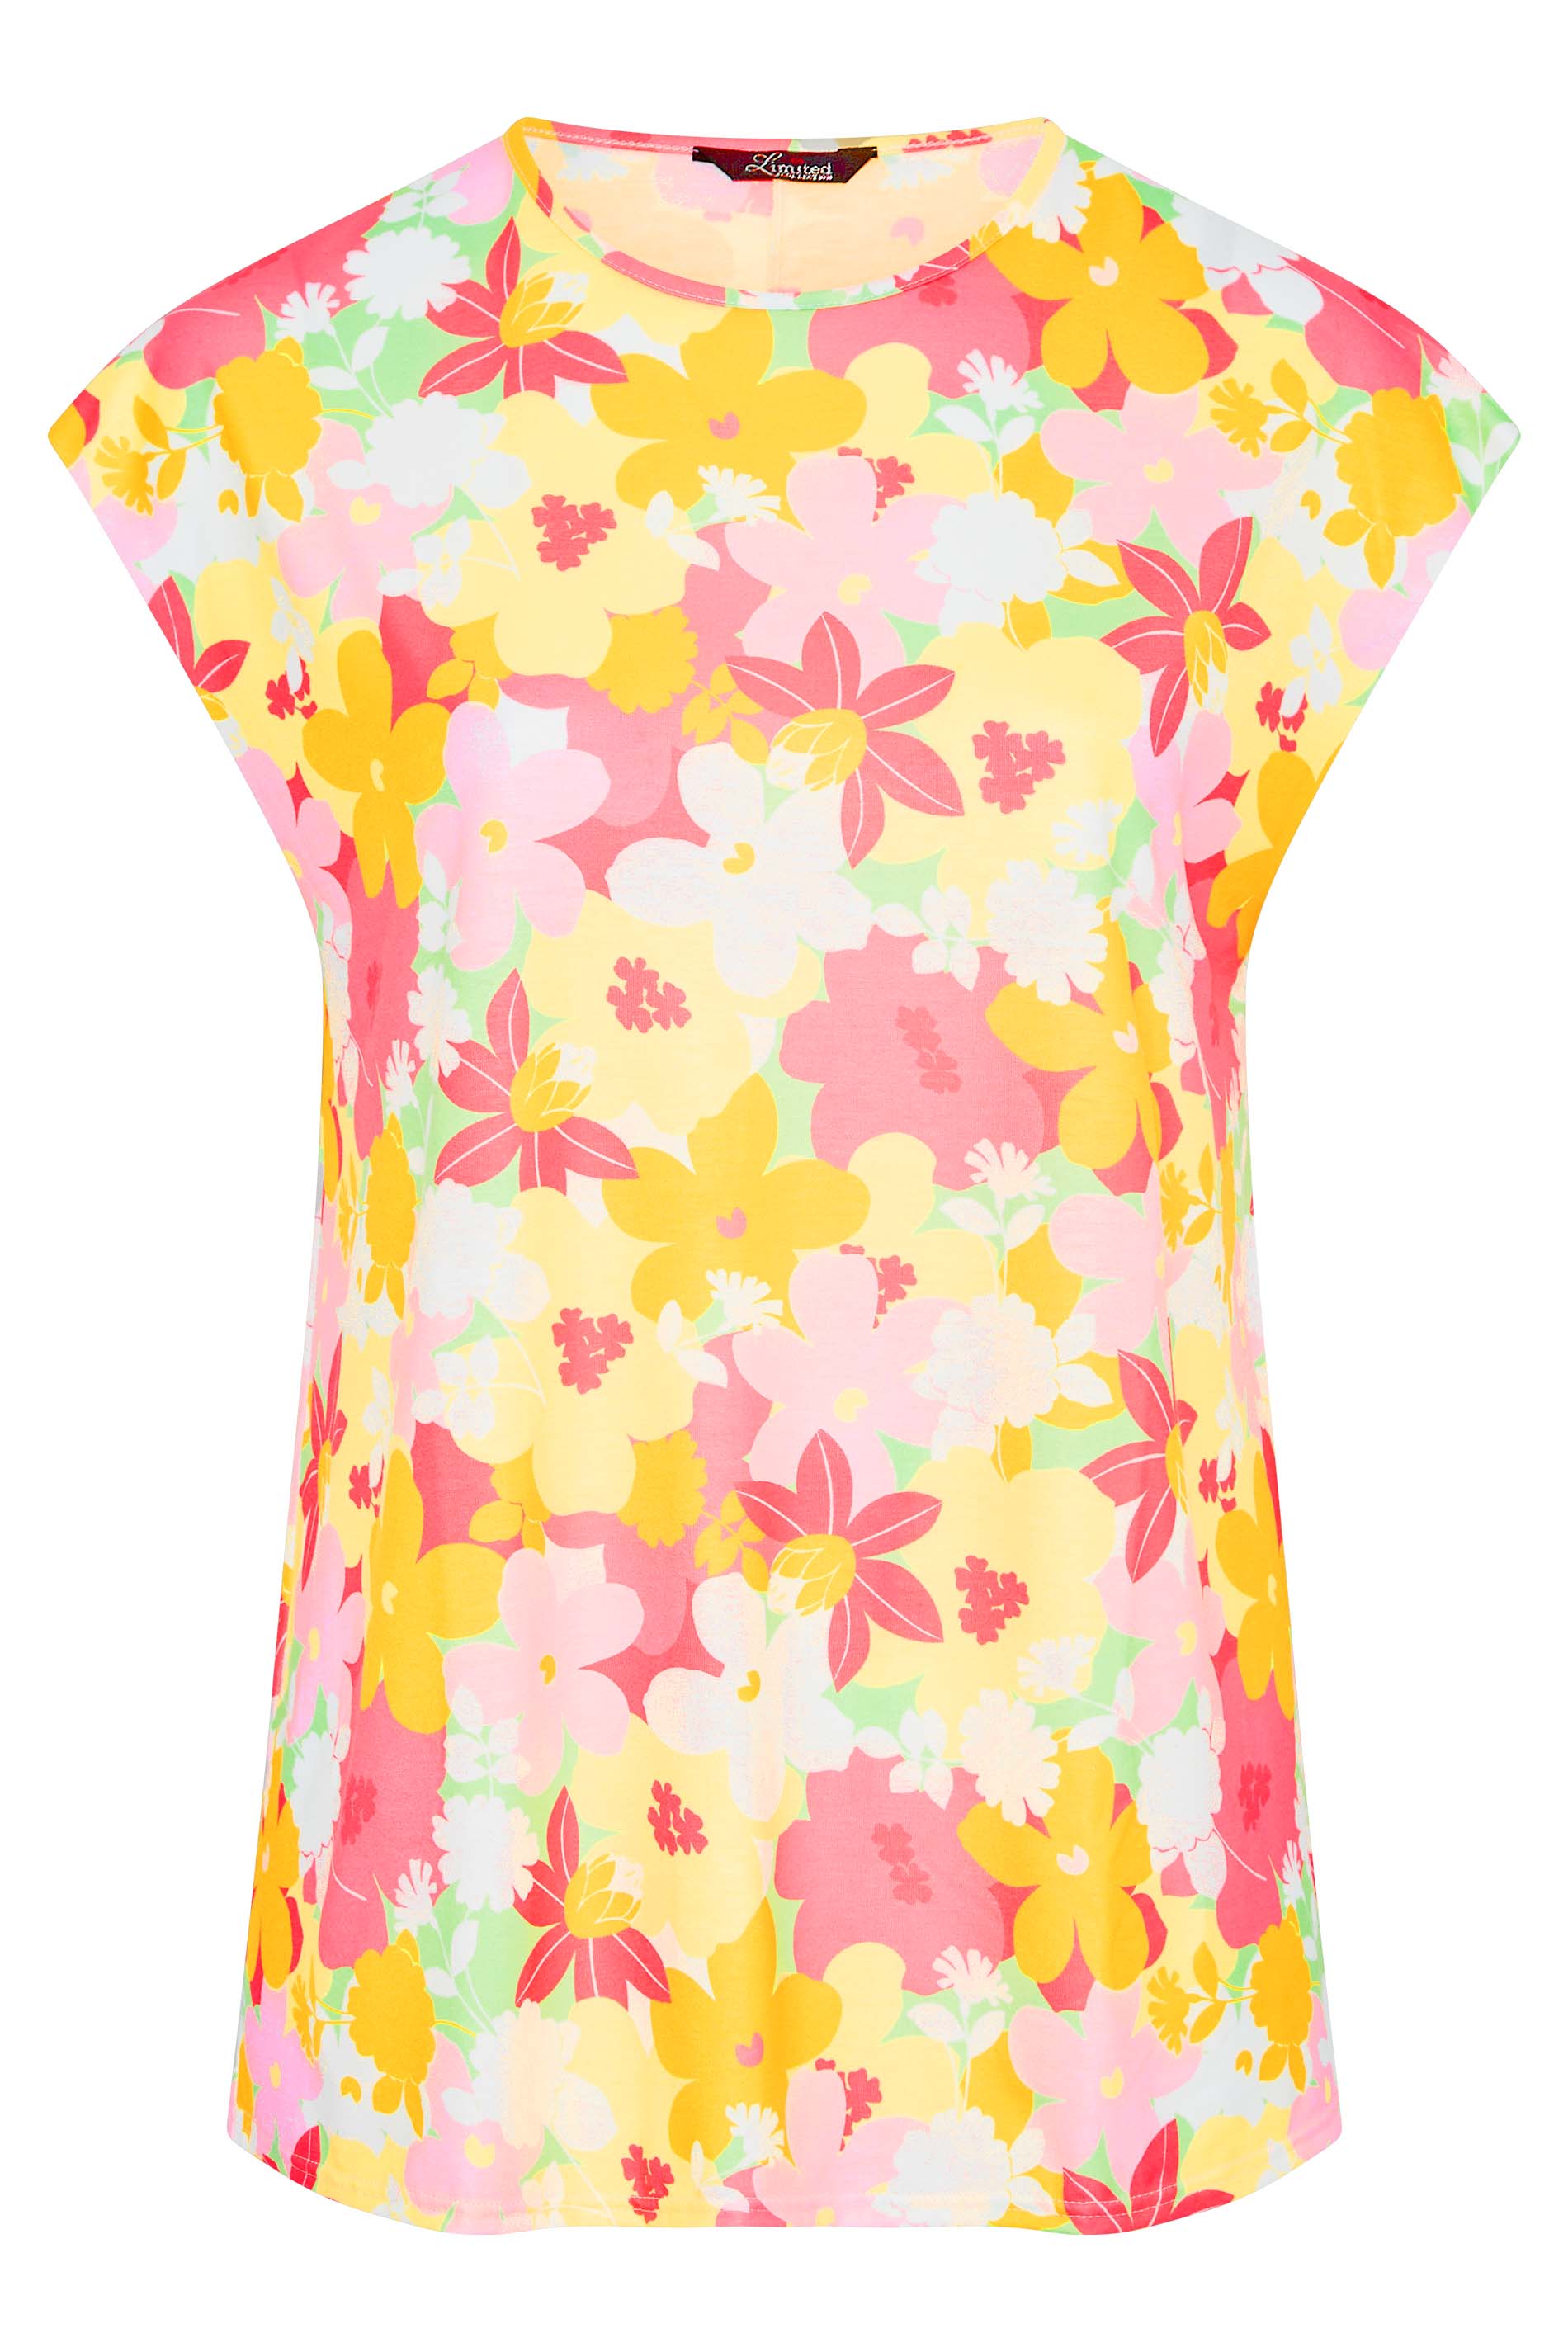 Grande taille  Tops Grande taille  Tops Jersey | LIMITED COLLECTION - T-Shirt Rétro Rose en Floral - QN15013